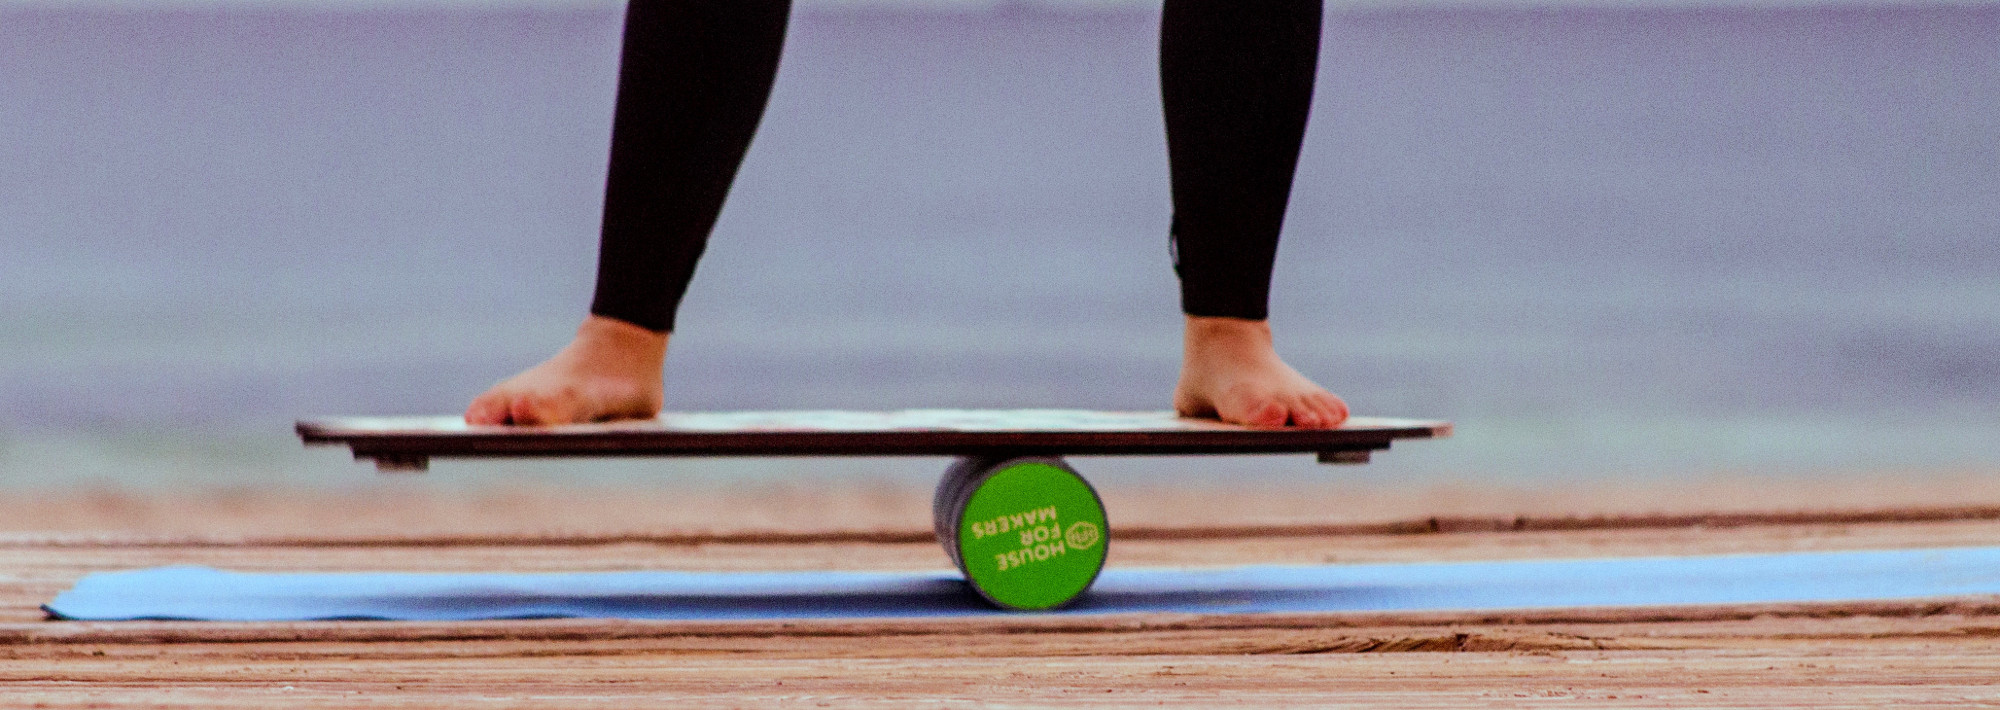 A person balancing on a balance board, as training before surfing.